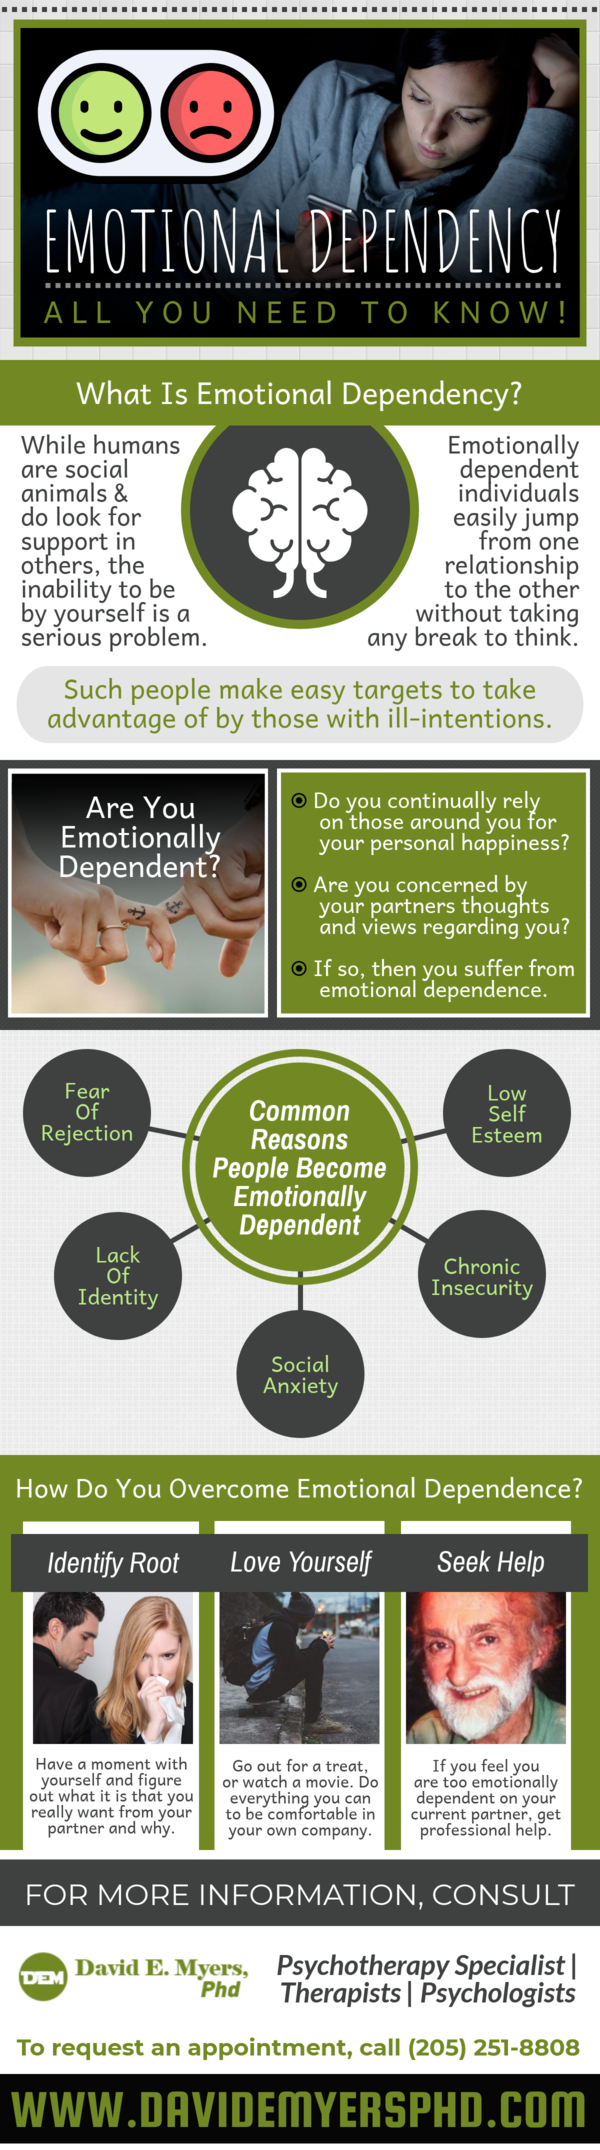 What Is Emotional Dependency